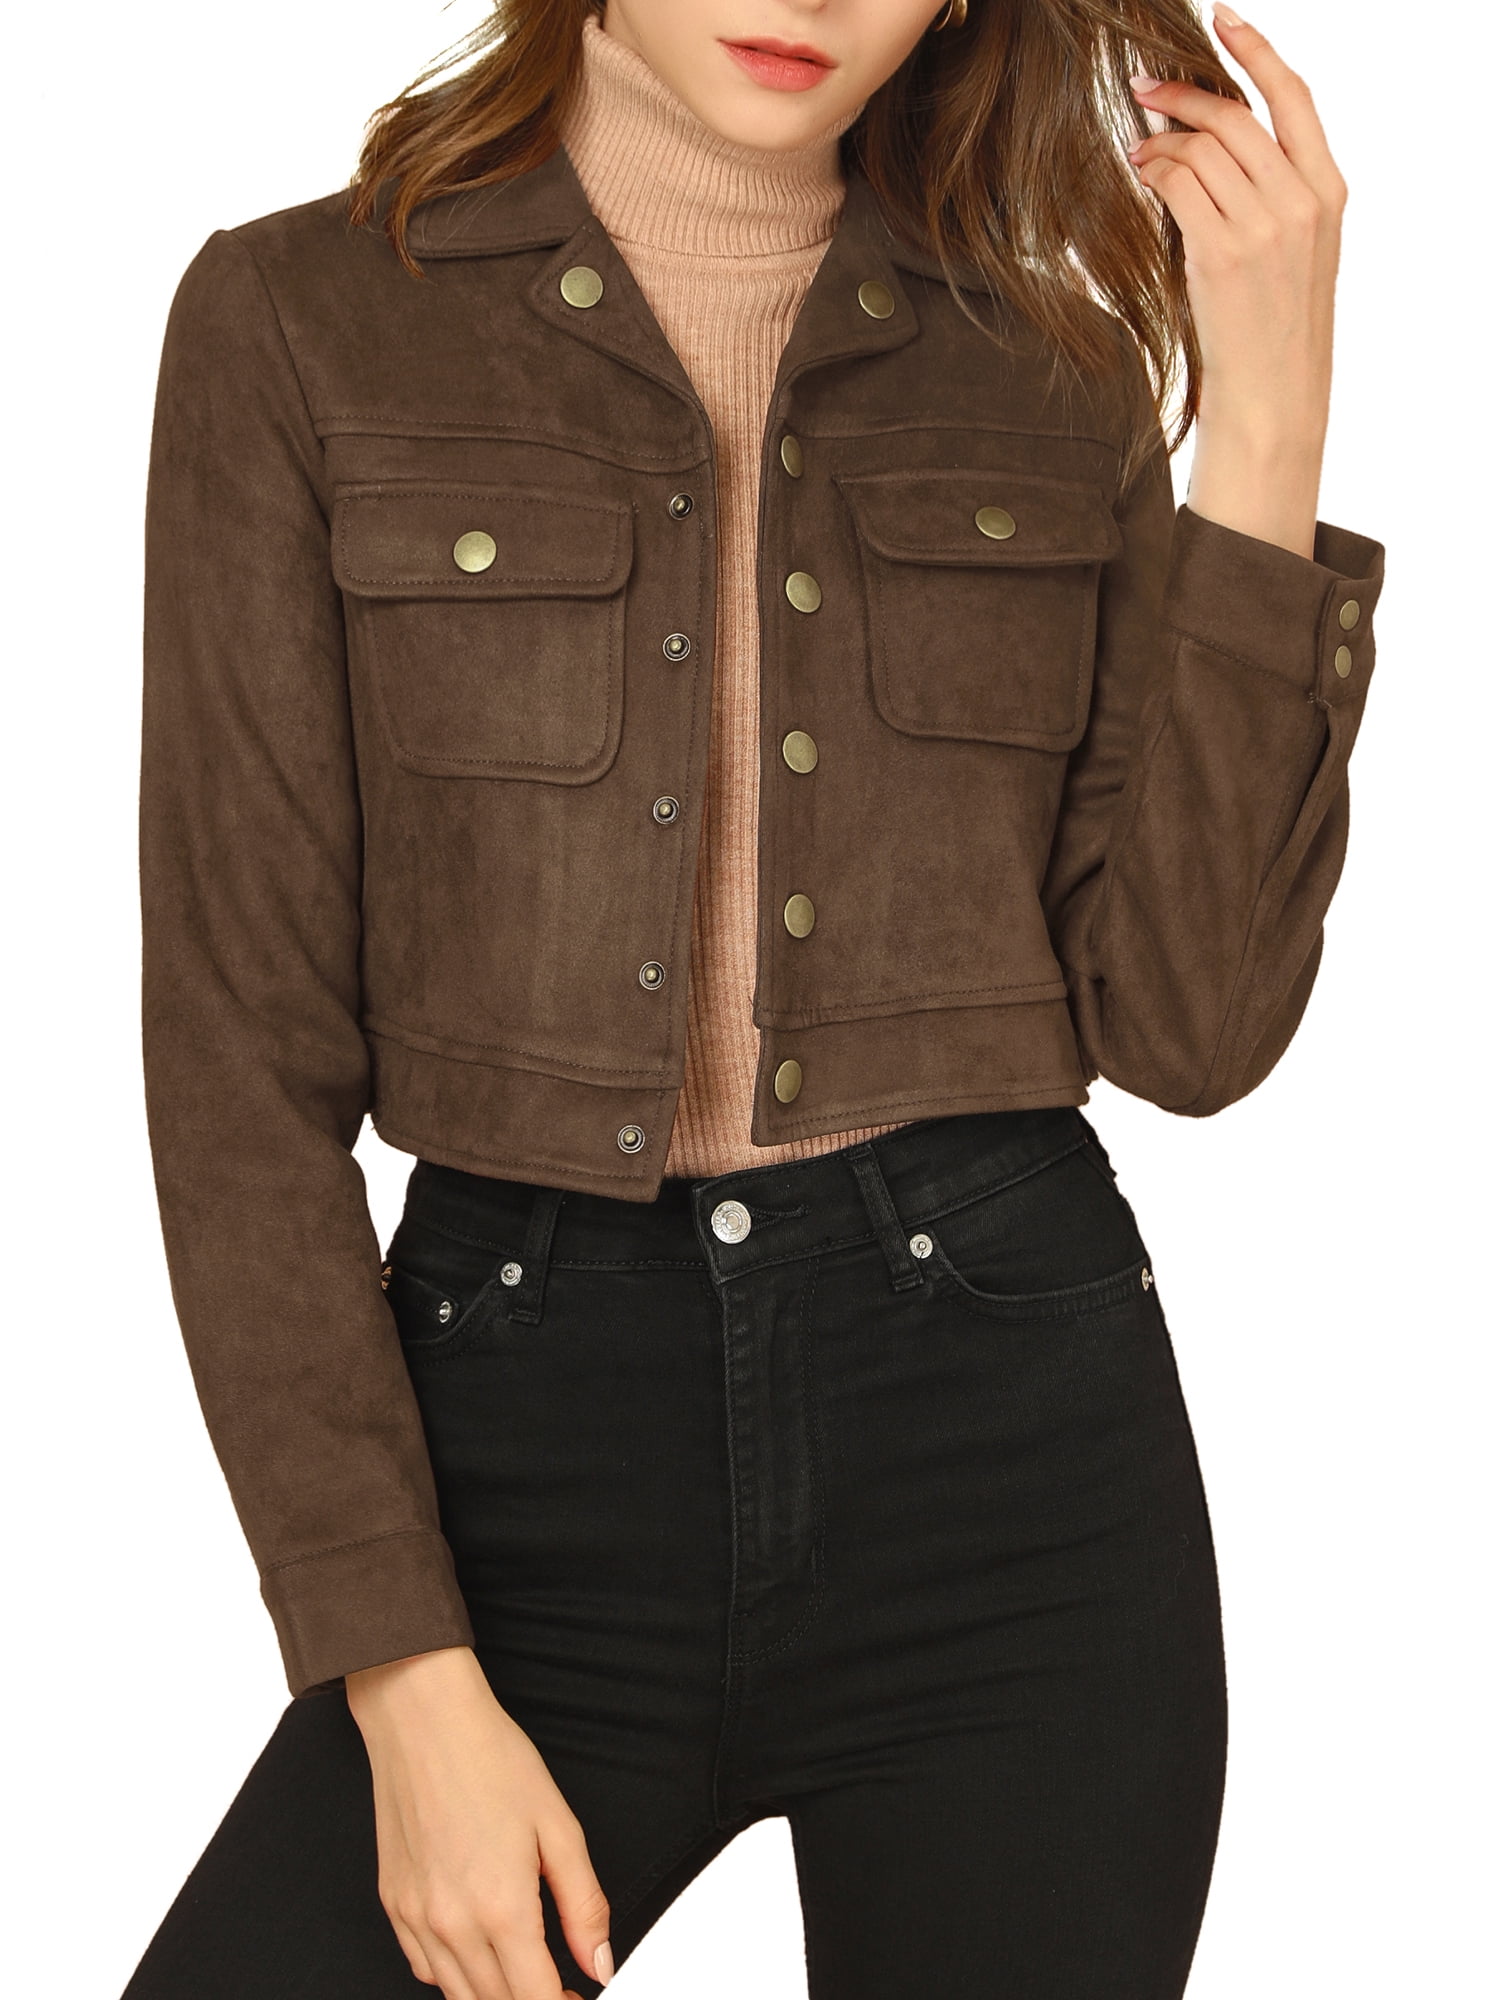 Allegra K - Women's Turn Down Collar Button Up Faux Suede Cropped ...